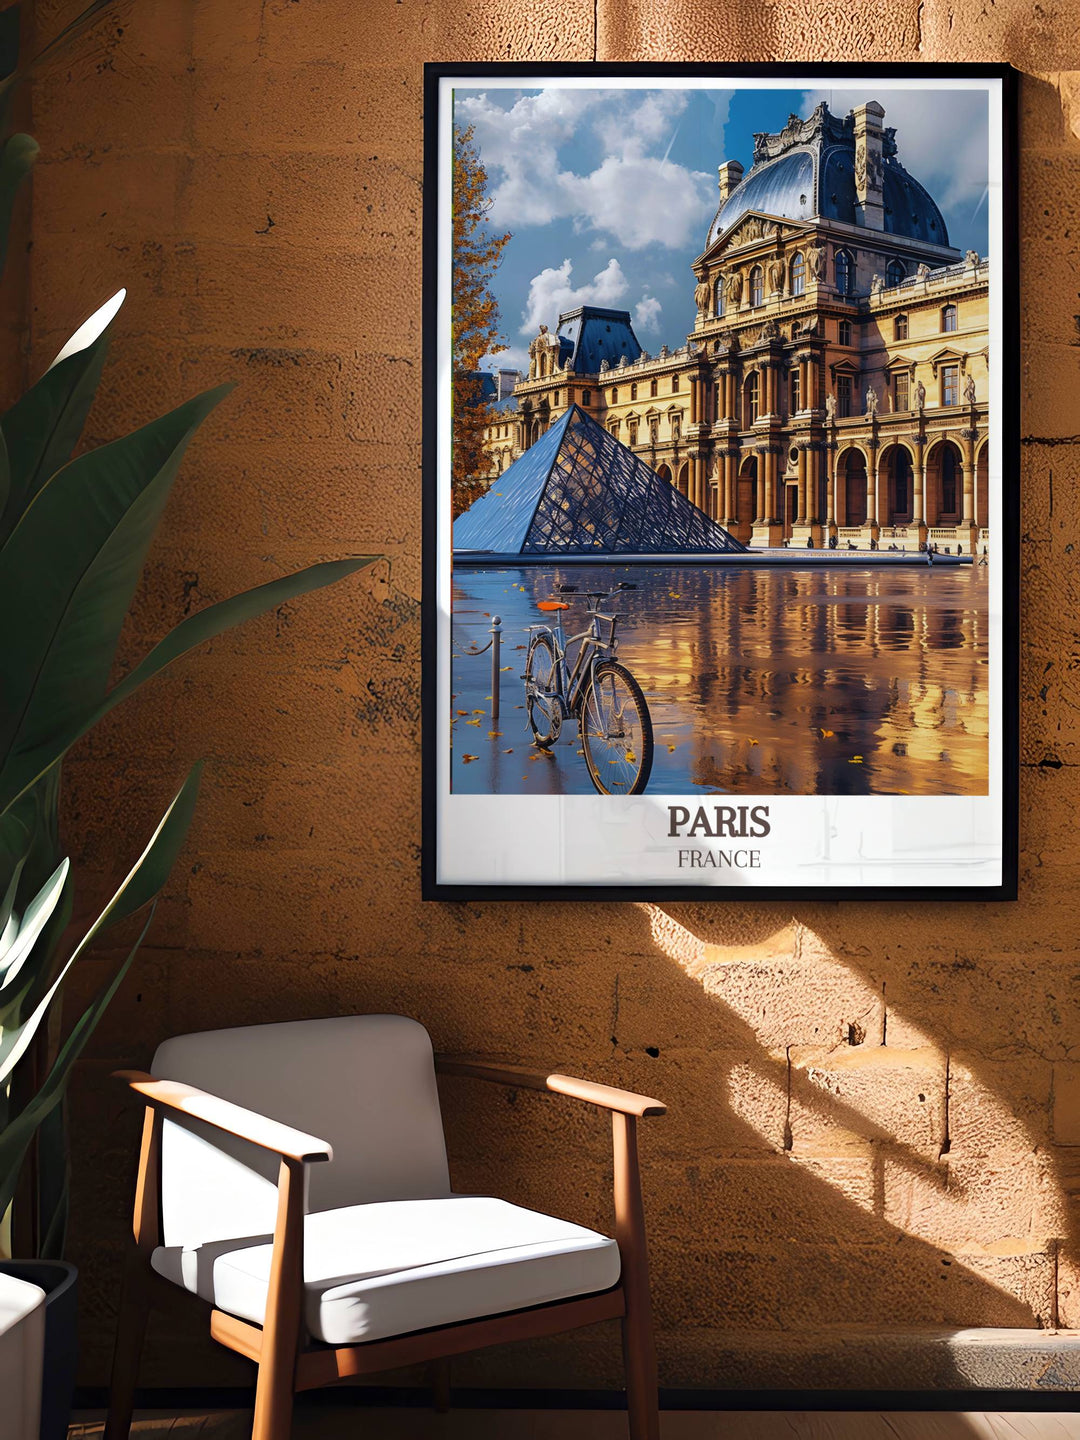 Handcrafted art prints showcasing the unique charm and character of Parisian neighborhoods, allowing you to experience the city like a local from the comfort of your own home.